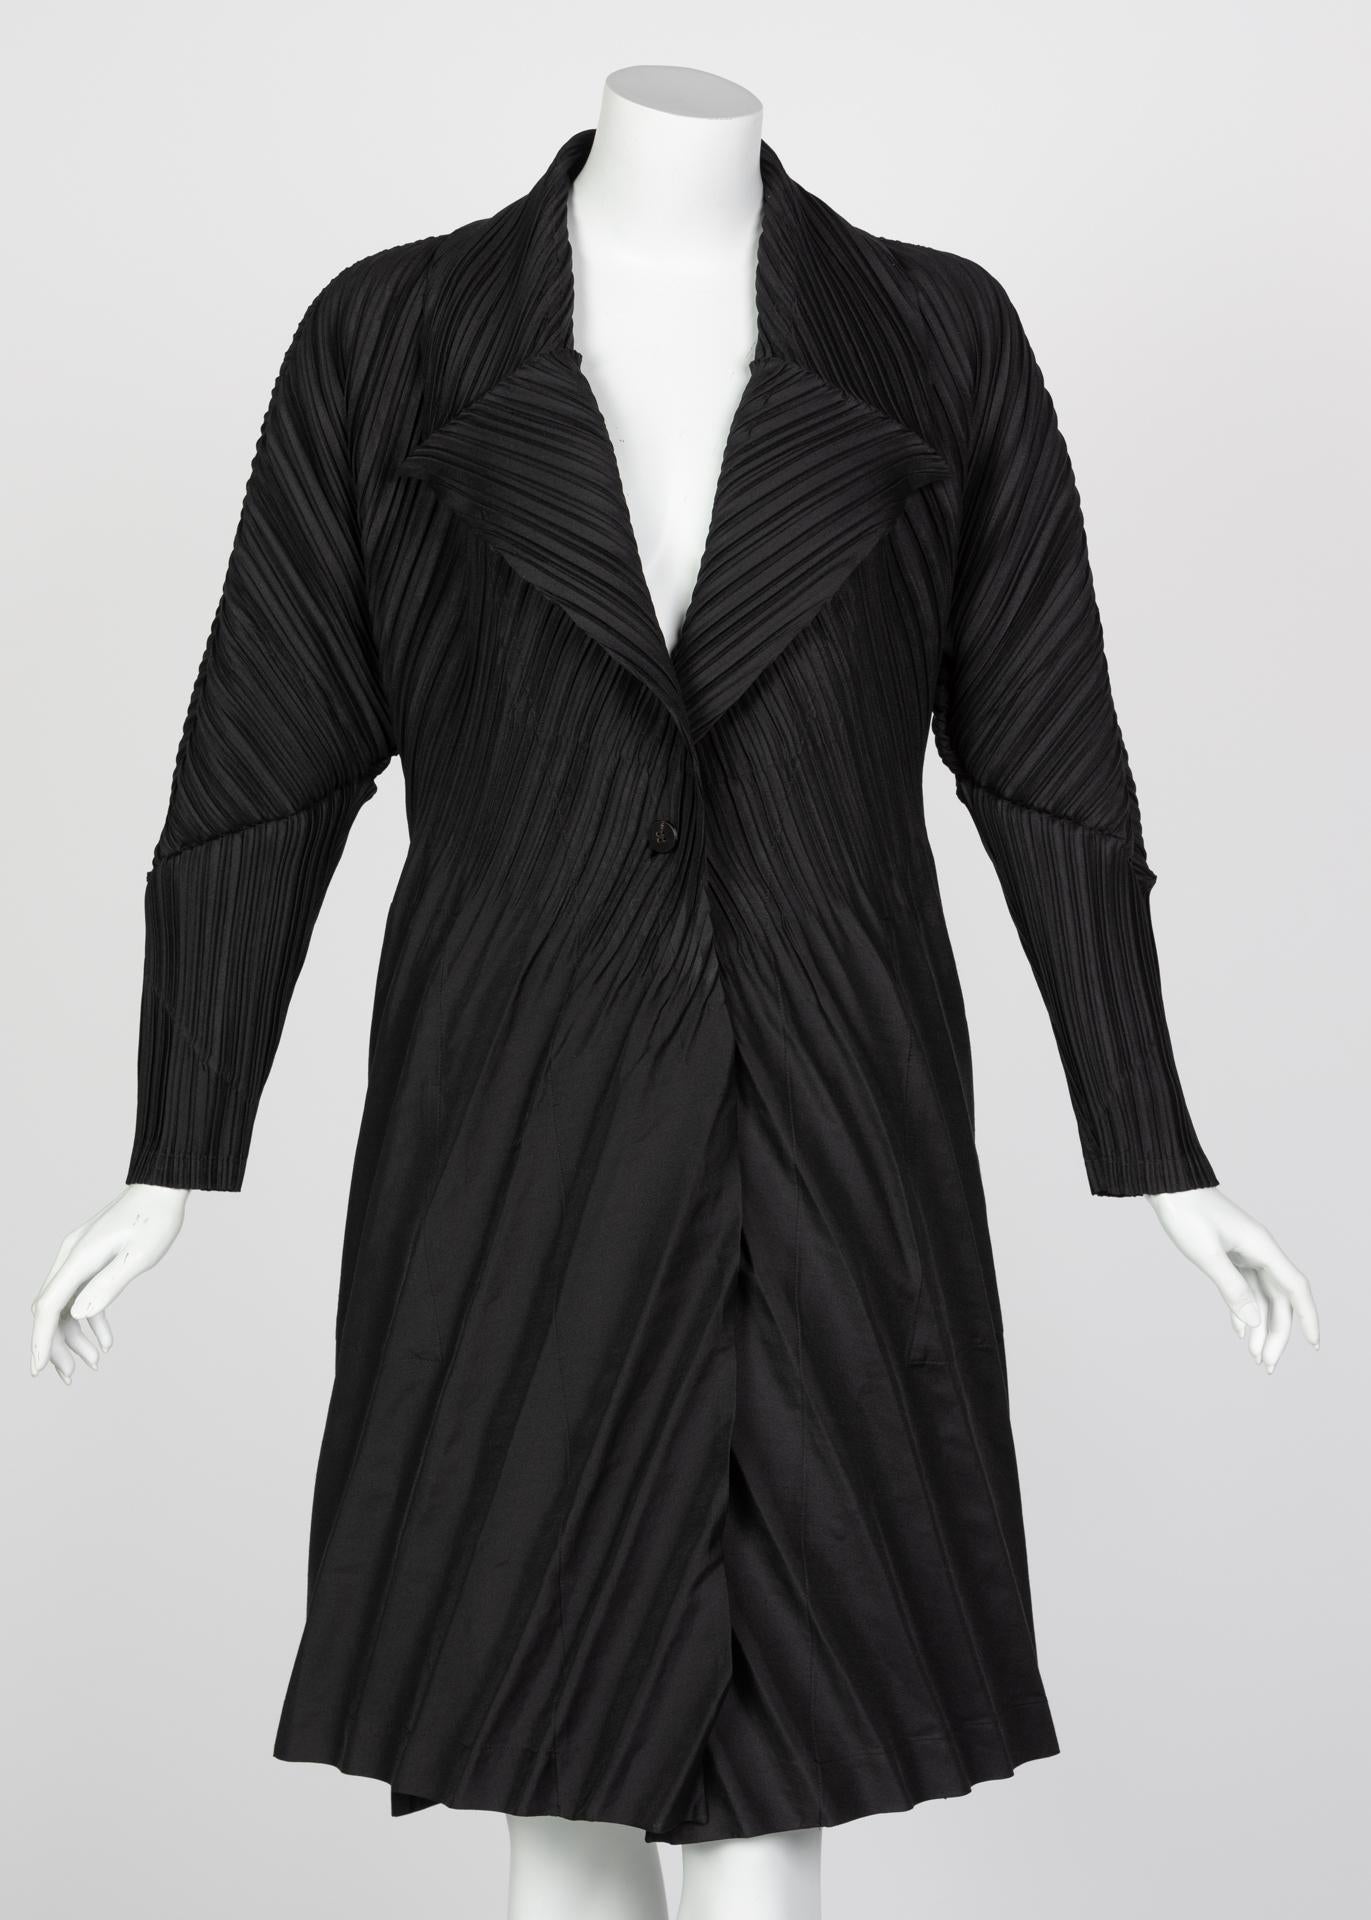 Issey Miyake Vintage Black Sculptural Pleated Cocoon Coat In Excellent Condition For Sale In Boca Raton, FL